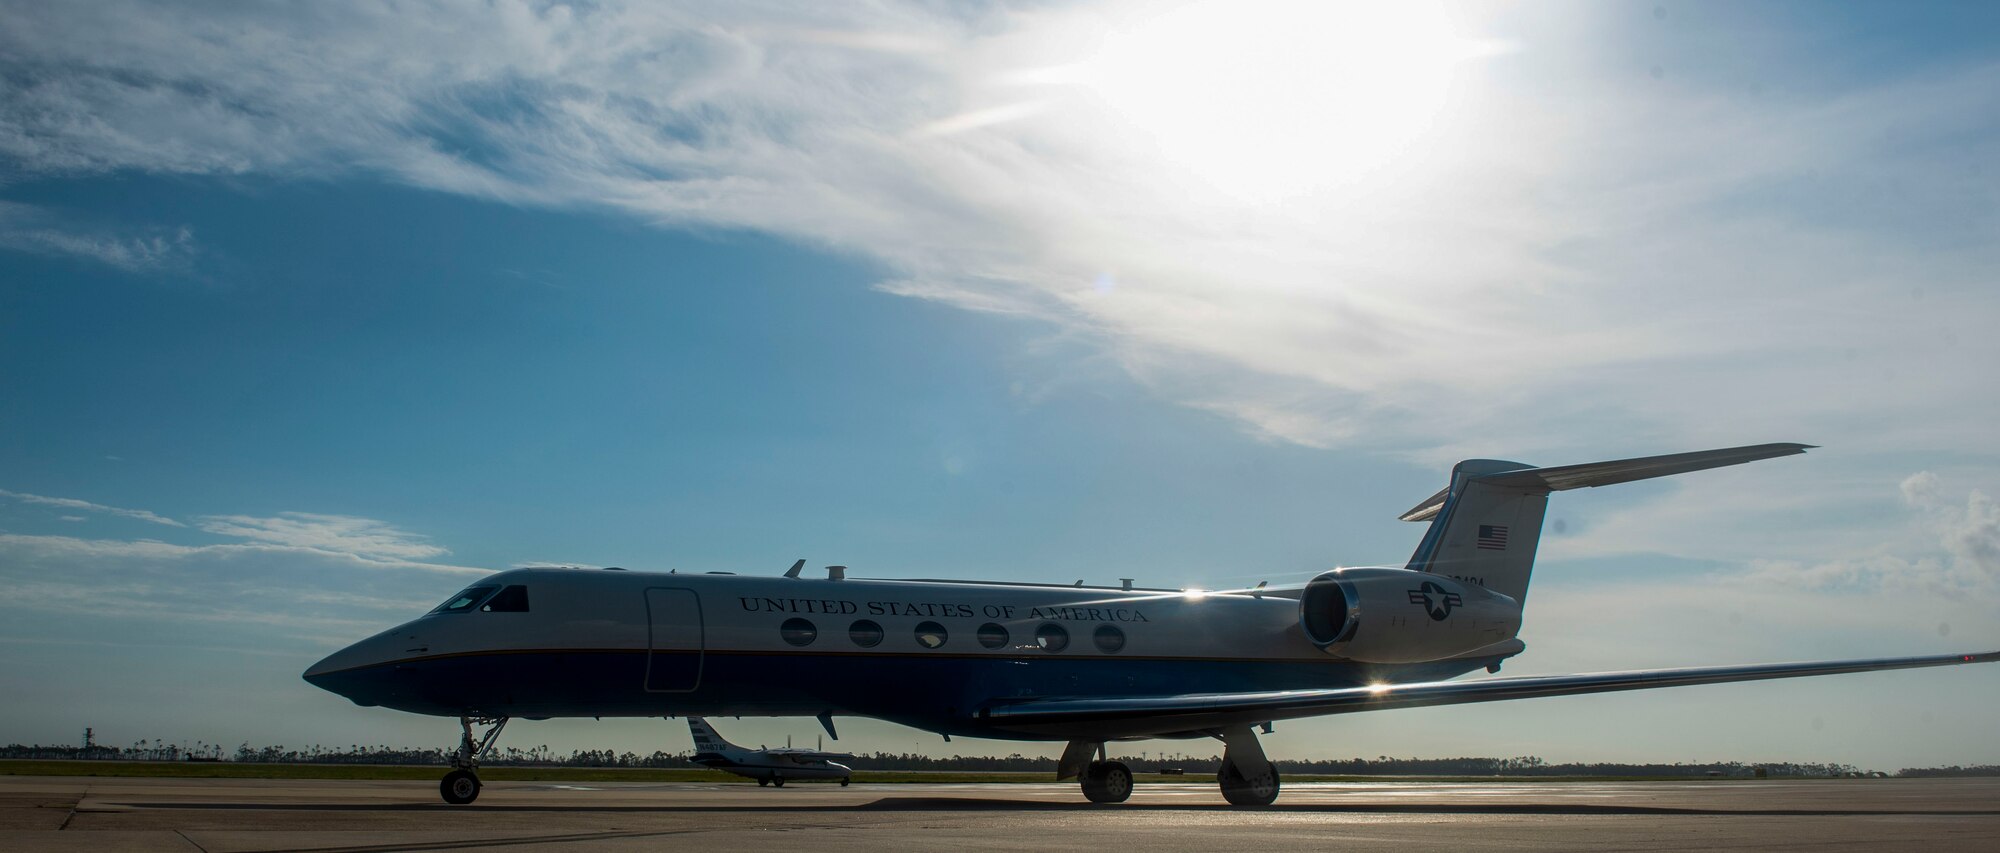 A U.S. Air Force C-37A/B aircraft lands on the flight line at Tyndall Air Force Base, Florida, Aug. 11, 2020. The twin-engine, turbofan aircraft was acquired to fulfill worldwide special airlift missions for high ranking government and Department of Defense officials. (U.S. Air Force photo by Staff Sgt. Magen M. Reeves)